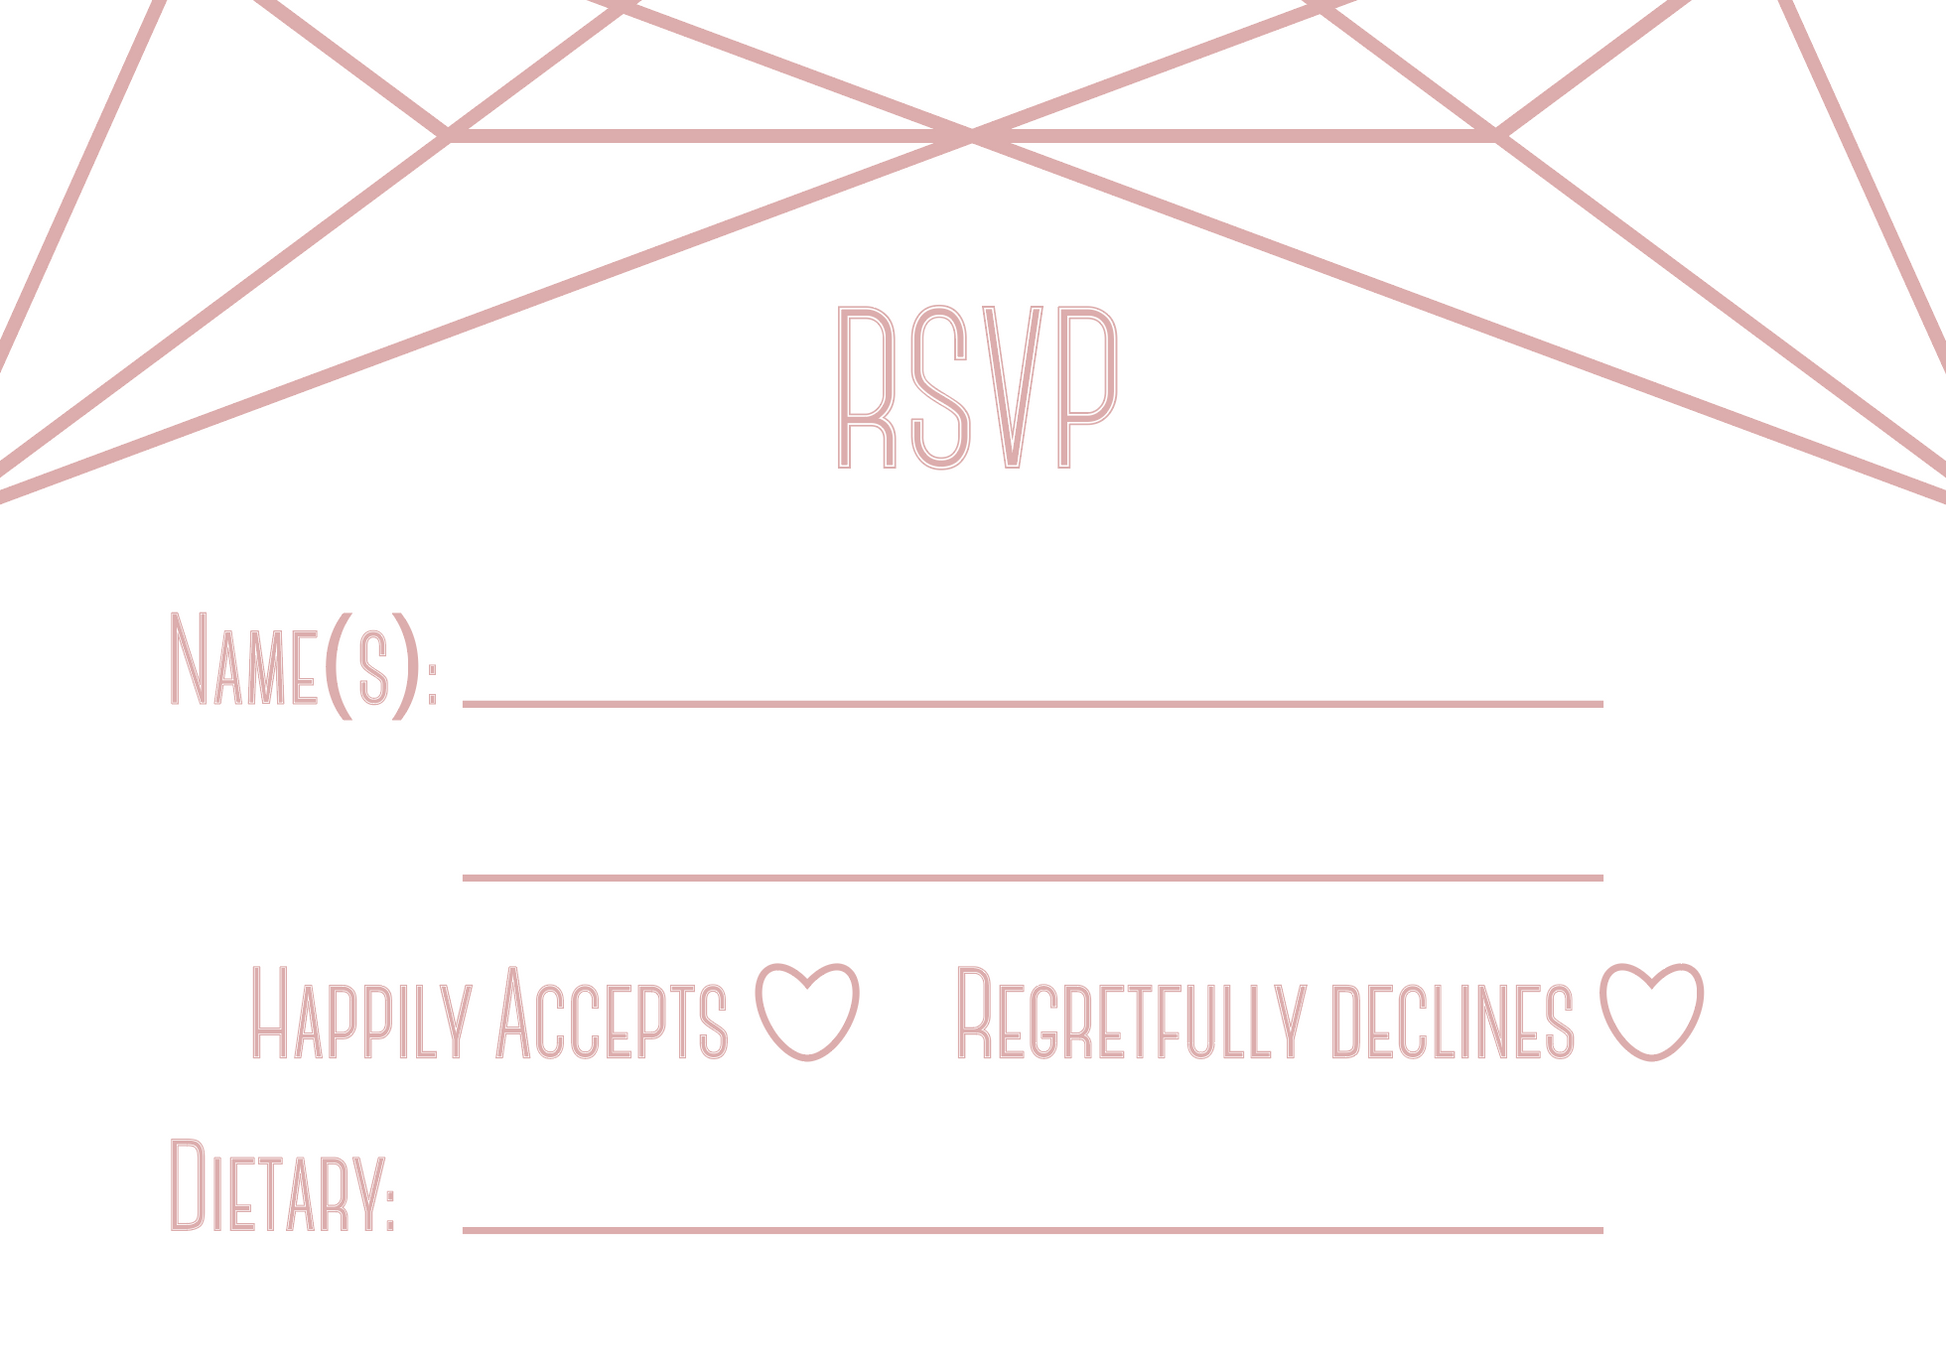 Double-sided A7 RSVP. This side has a white background and blush detail/text. There is space for the guests to write their names, and tick whether they can or cannot attend the wedding. There is also a space for them to indicate their dietary requirements.